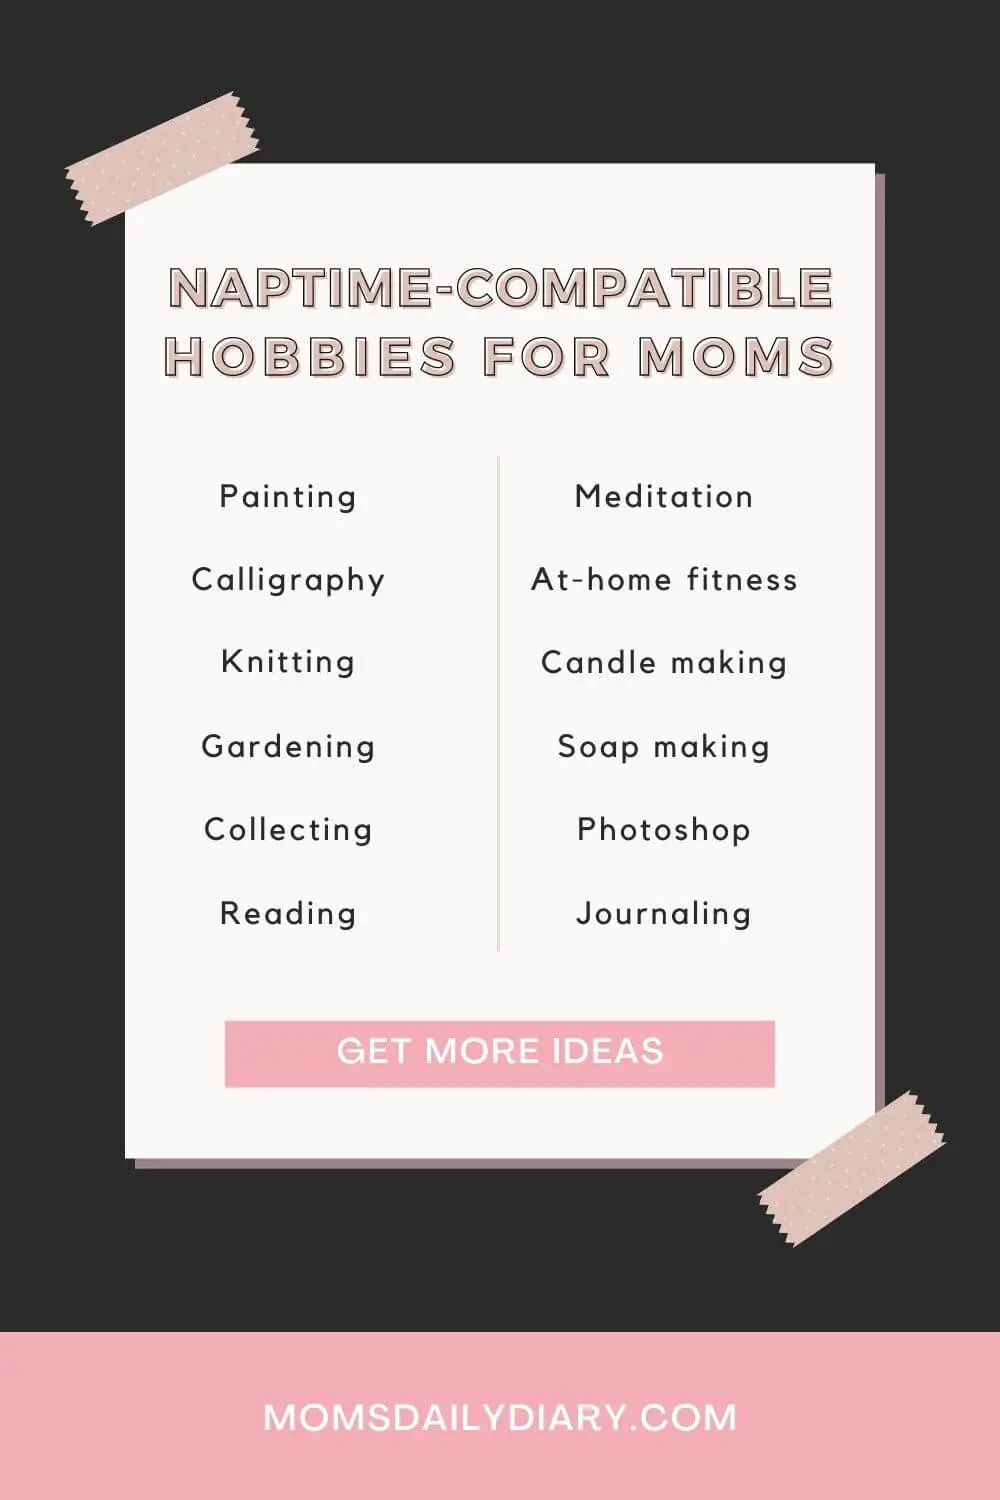 Pinterest pin with a list of naptime compatible hobbies for moms like meditation, knitting, gardening, candle making, and a prompt to visit the site for more ideas.